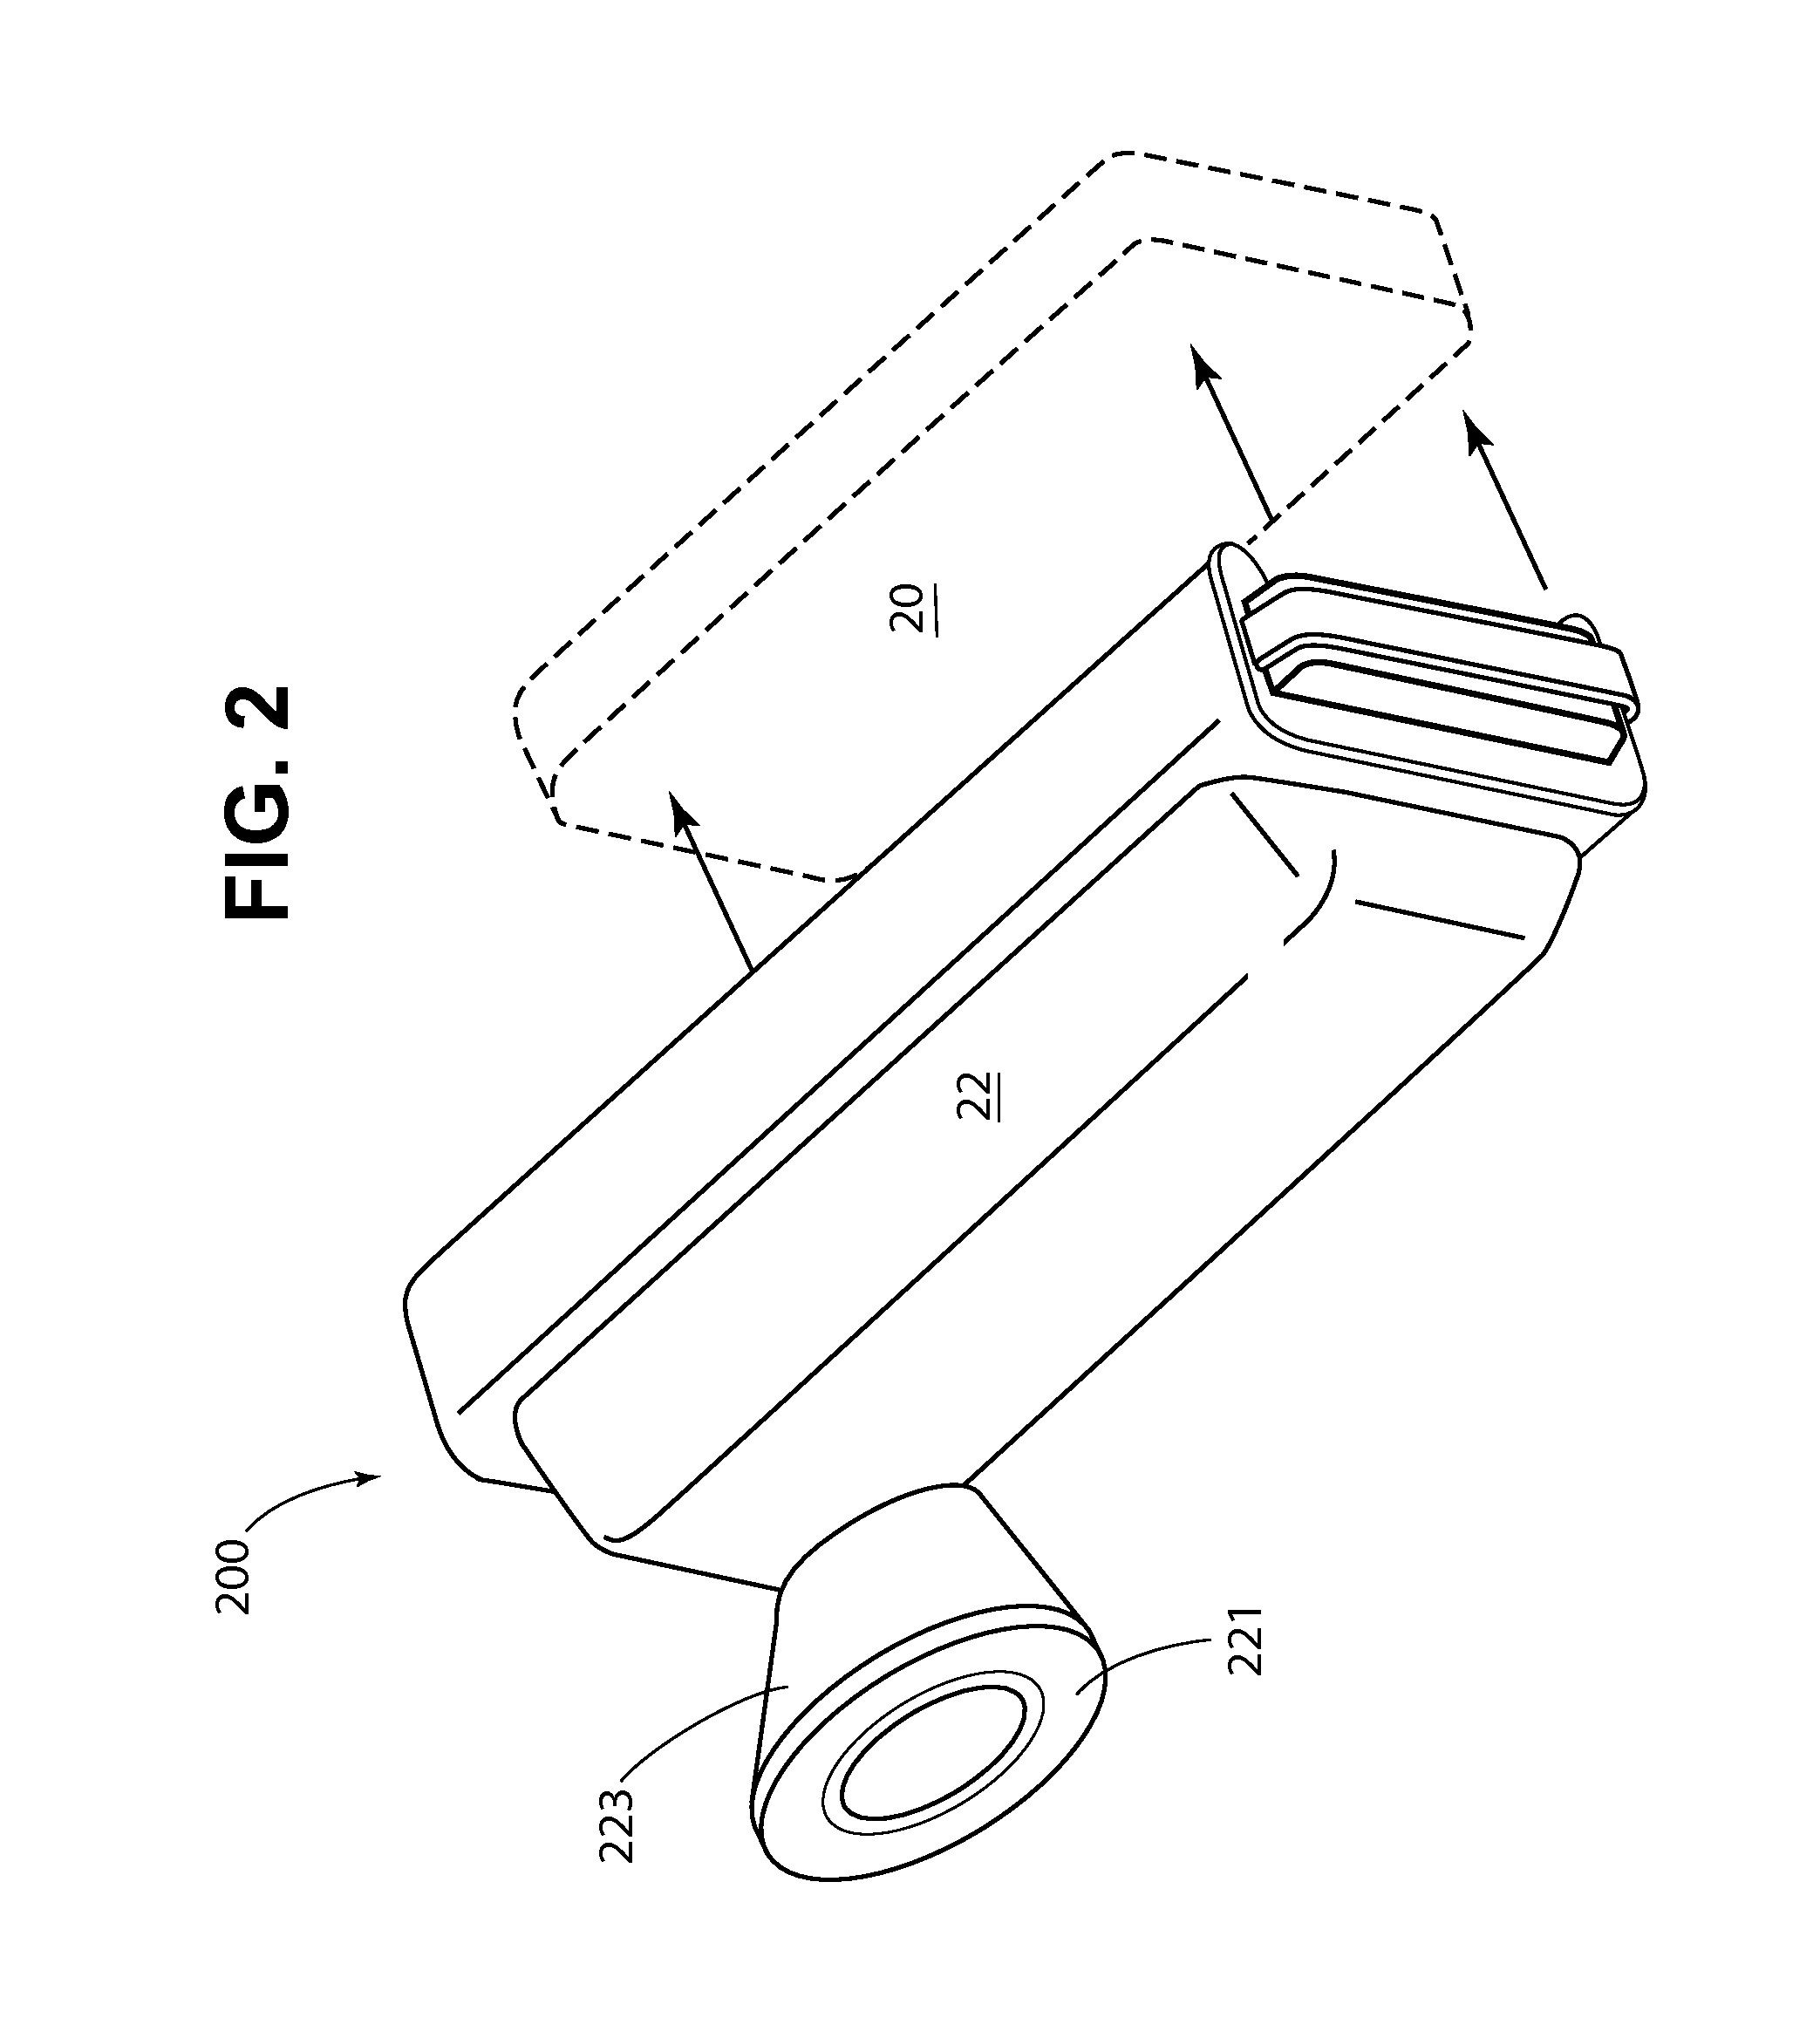 System and method for optical detection of skin disease